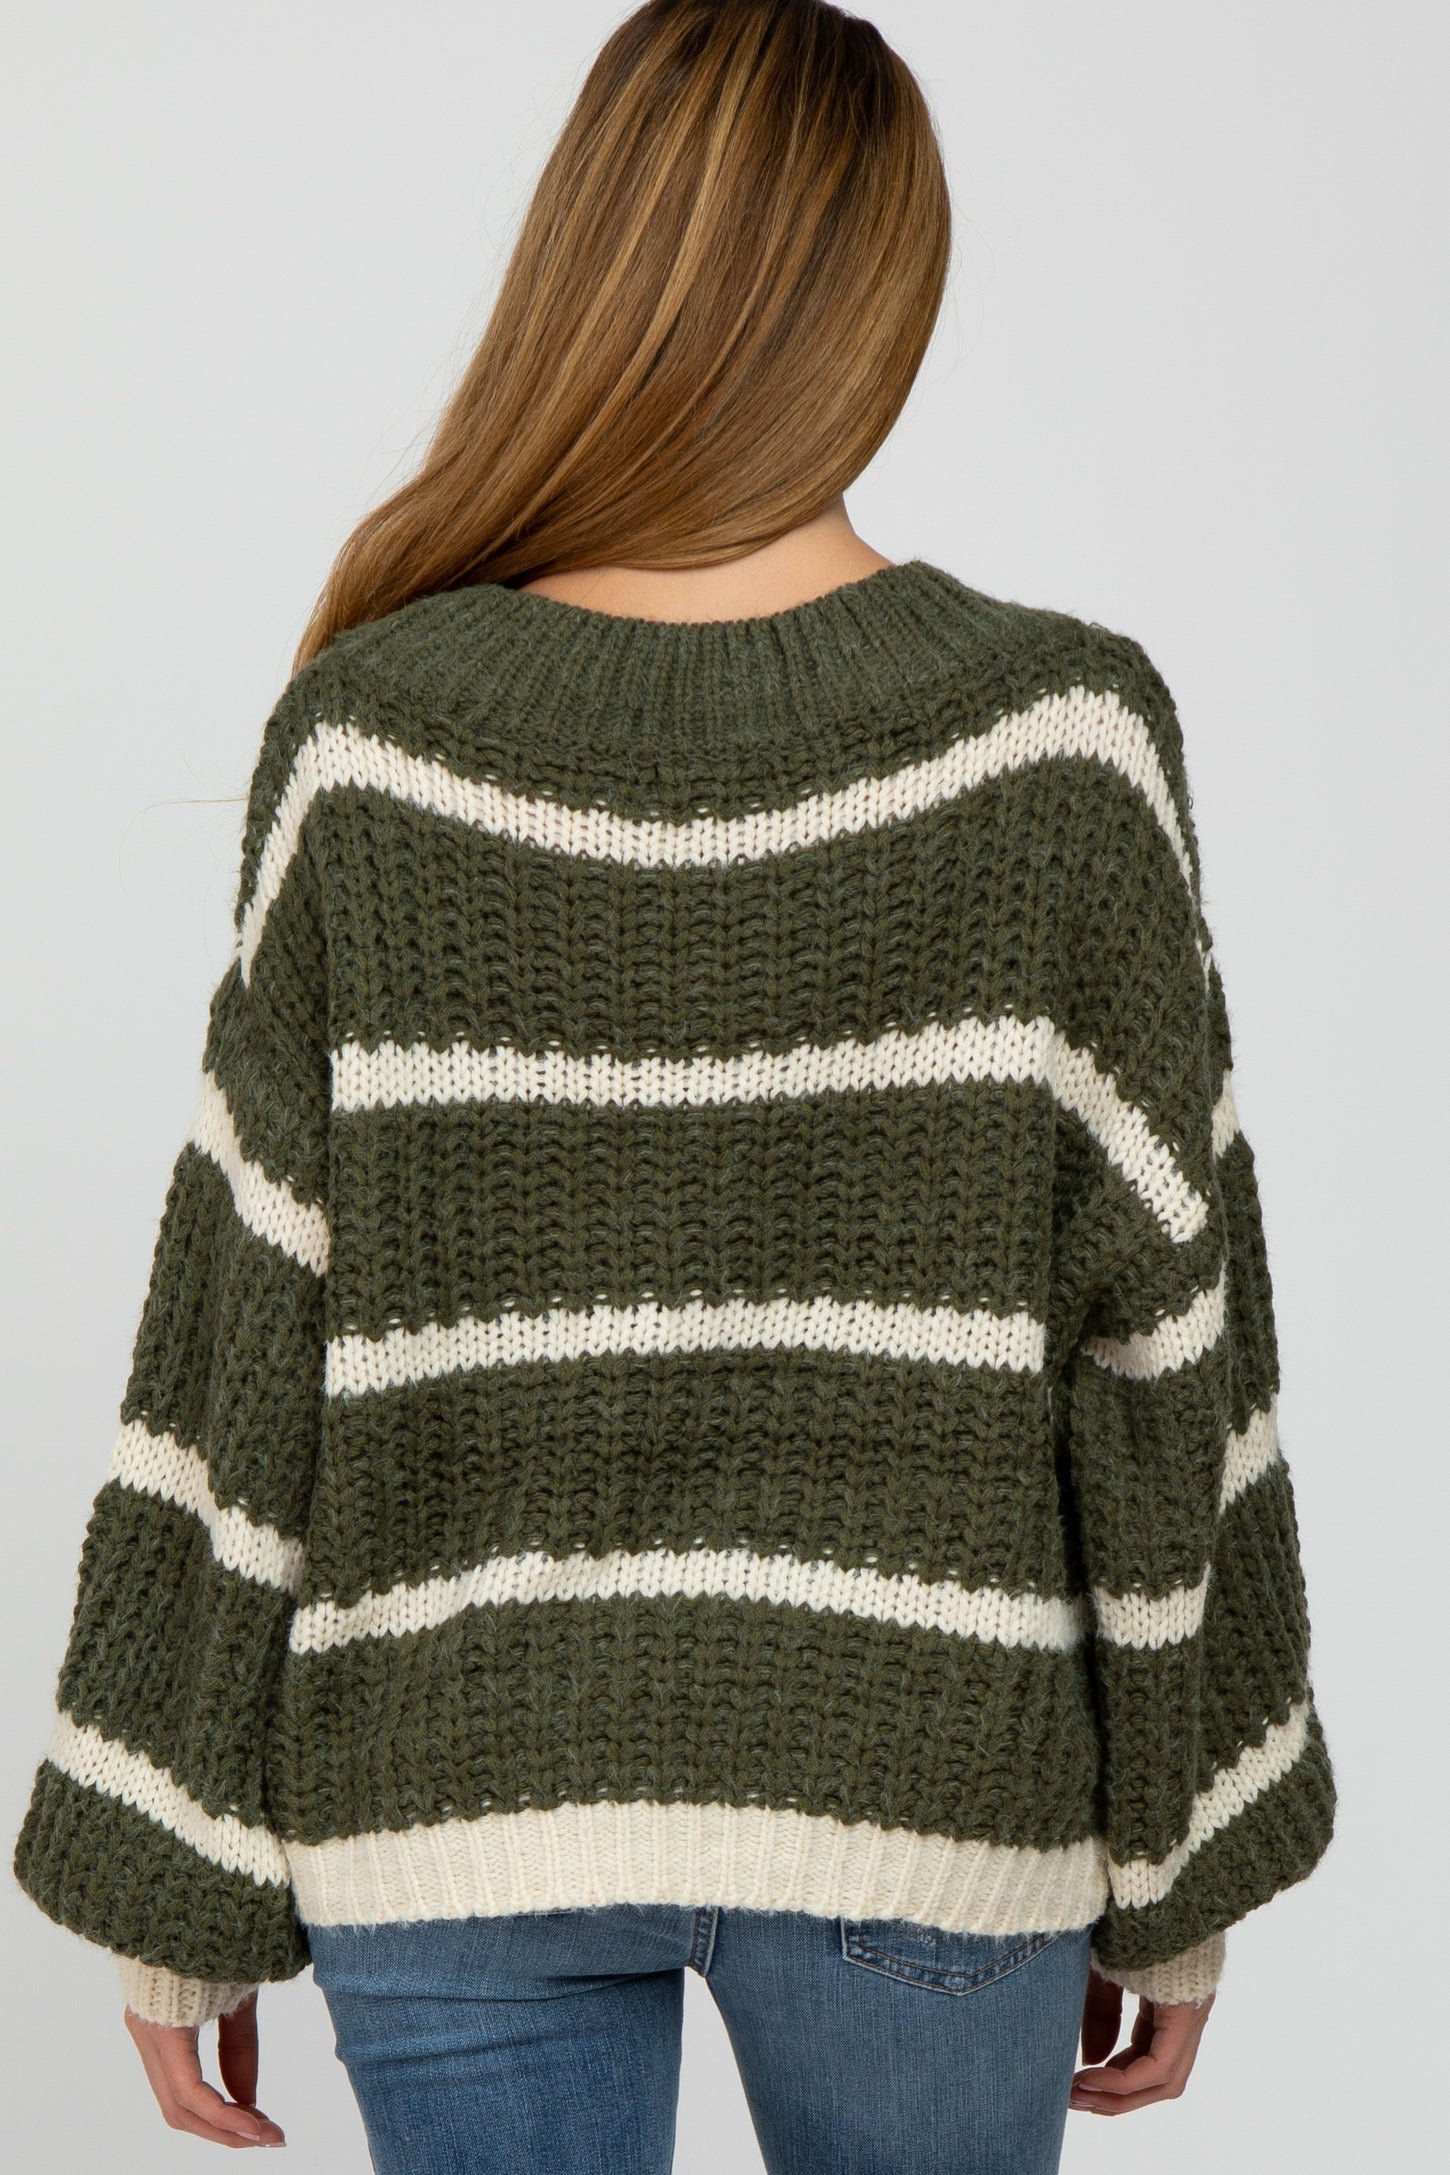 Olive Cream Striped Chunky Knit Maternity Sweater